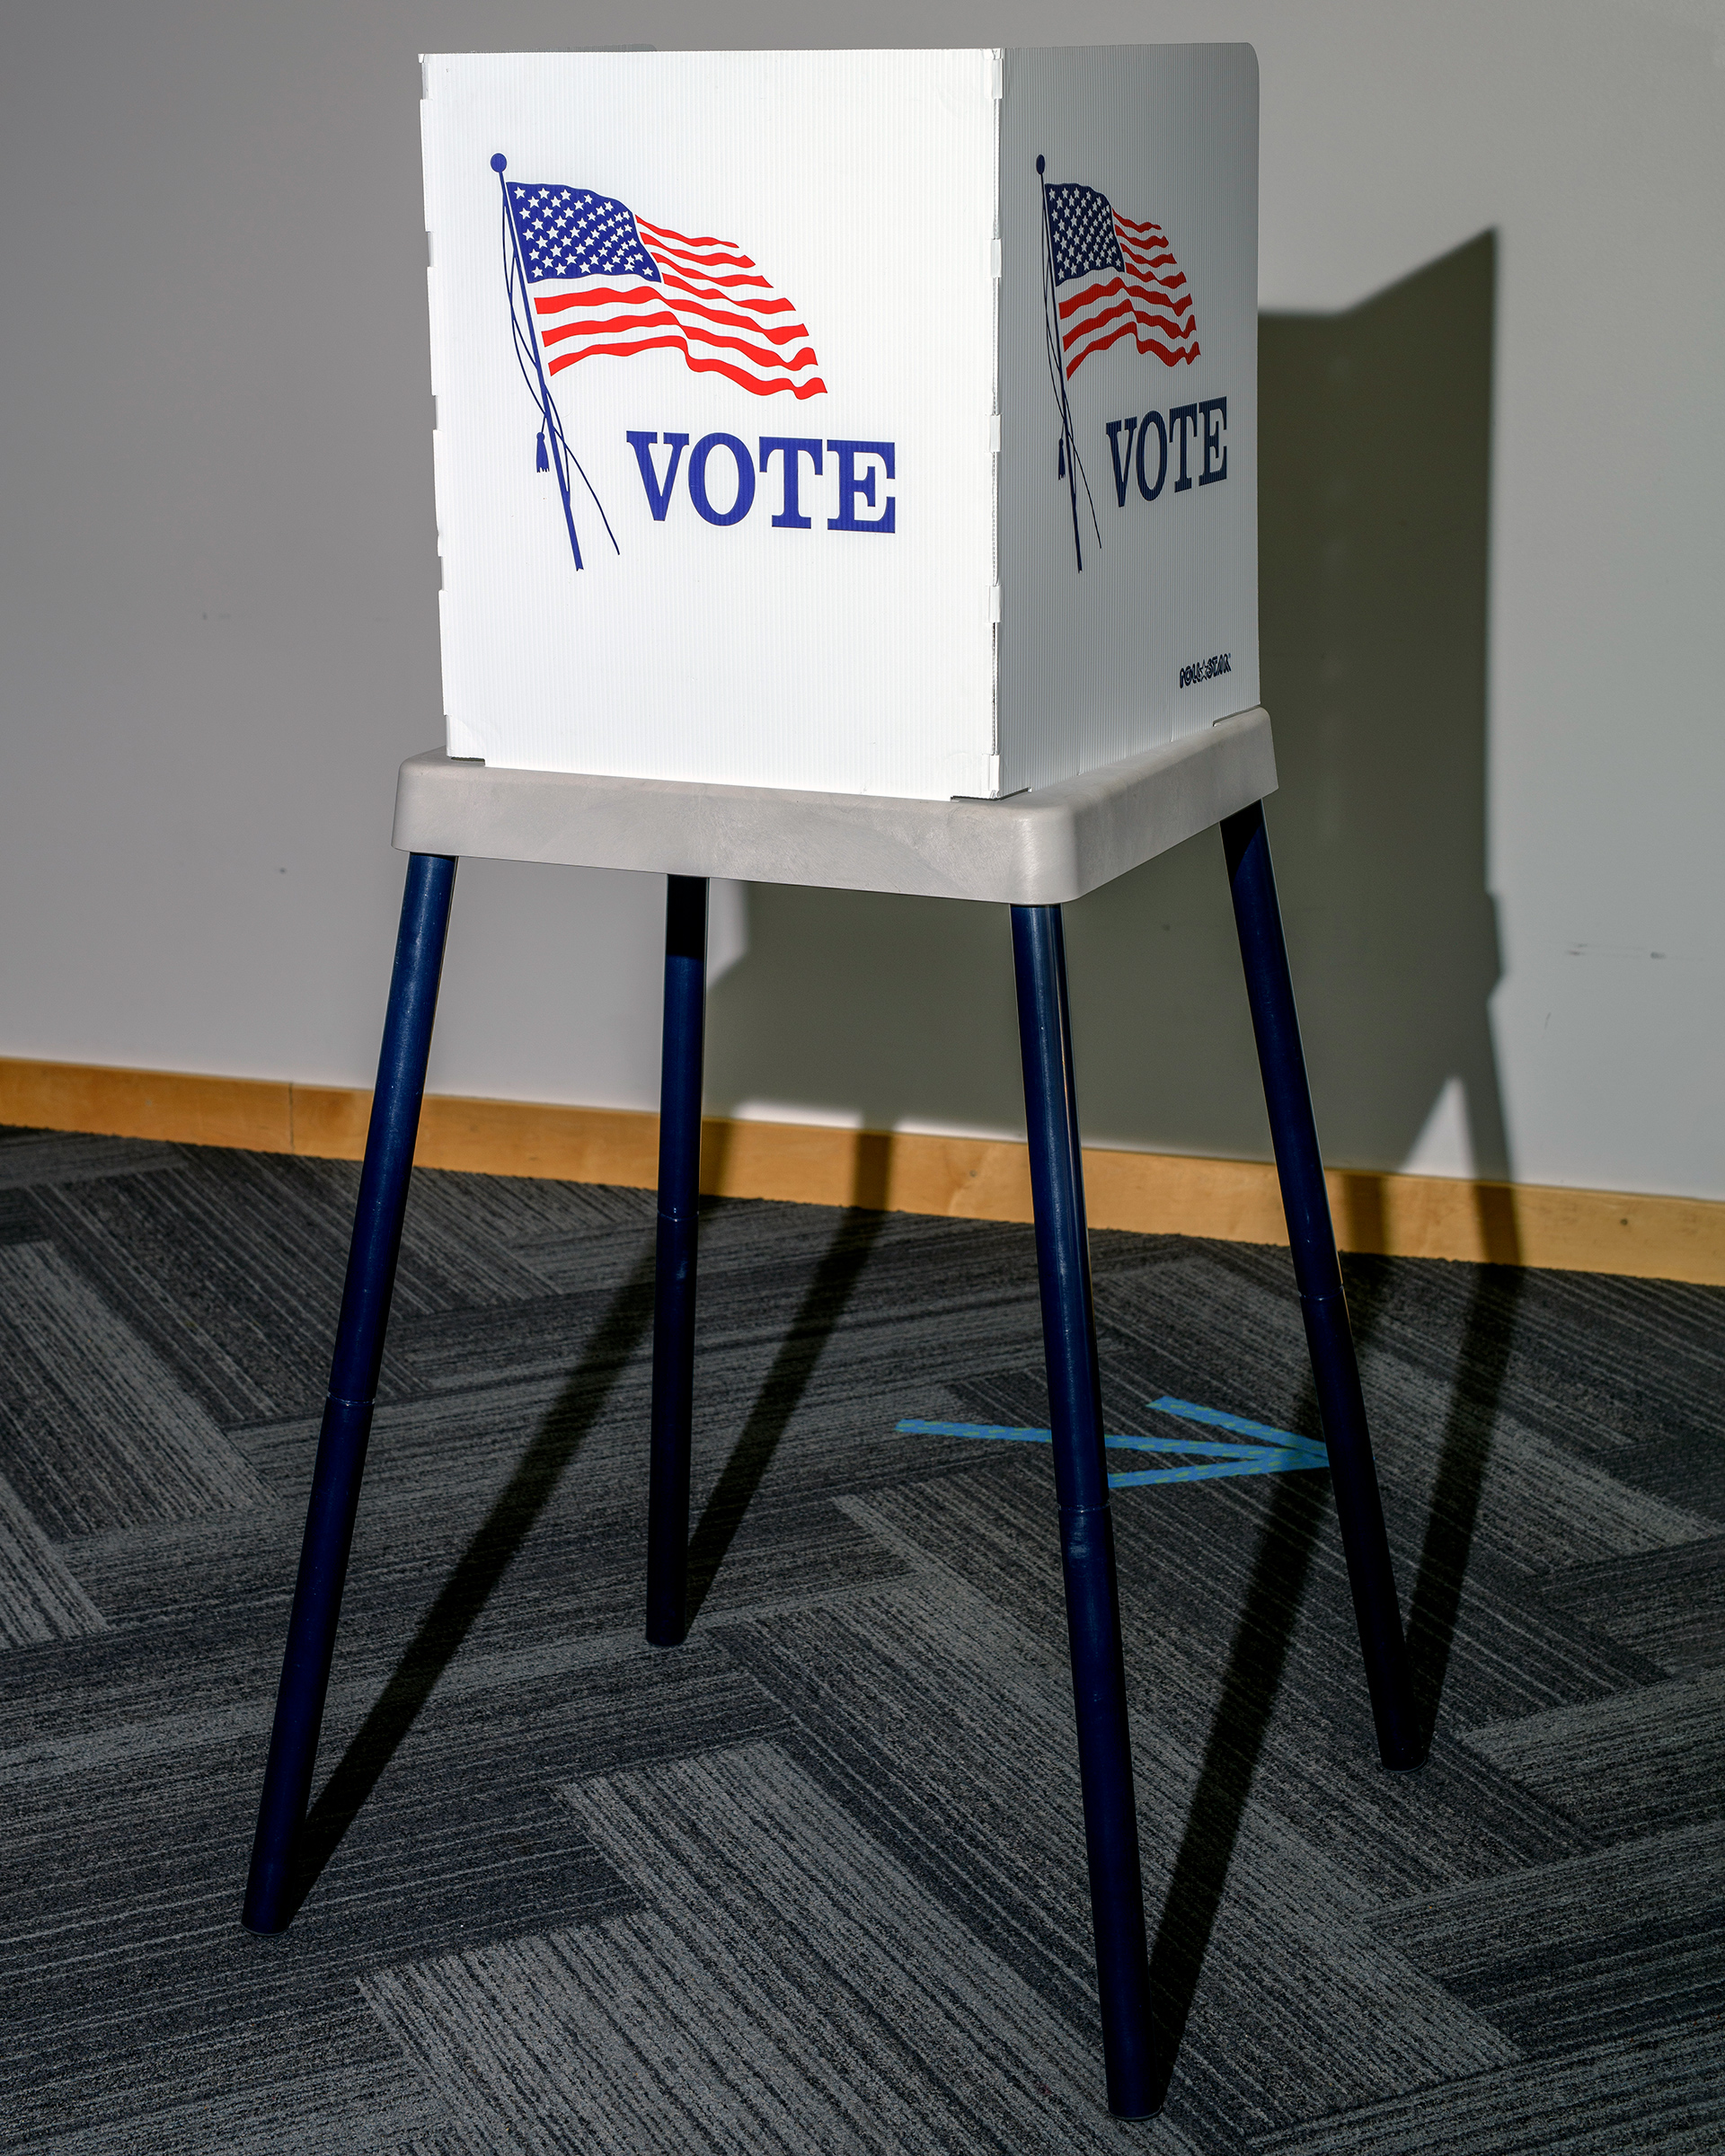 A voting booth is shown set up at the Ames Public Library on Primary Election Day on June 7, 2022 in Ames, Iowa. (Stephen Maturen—Getty Images)